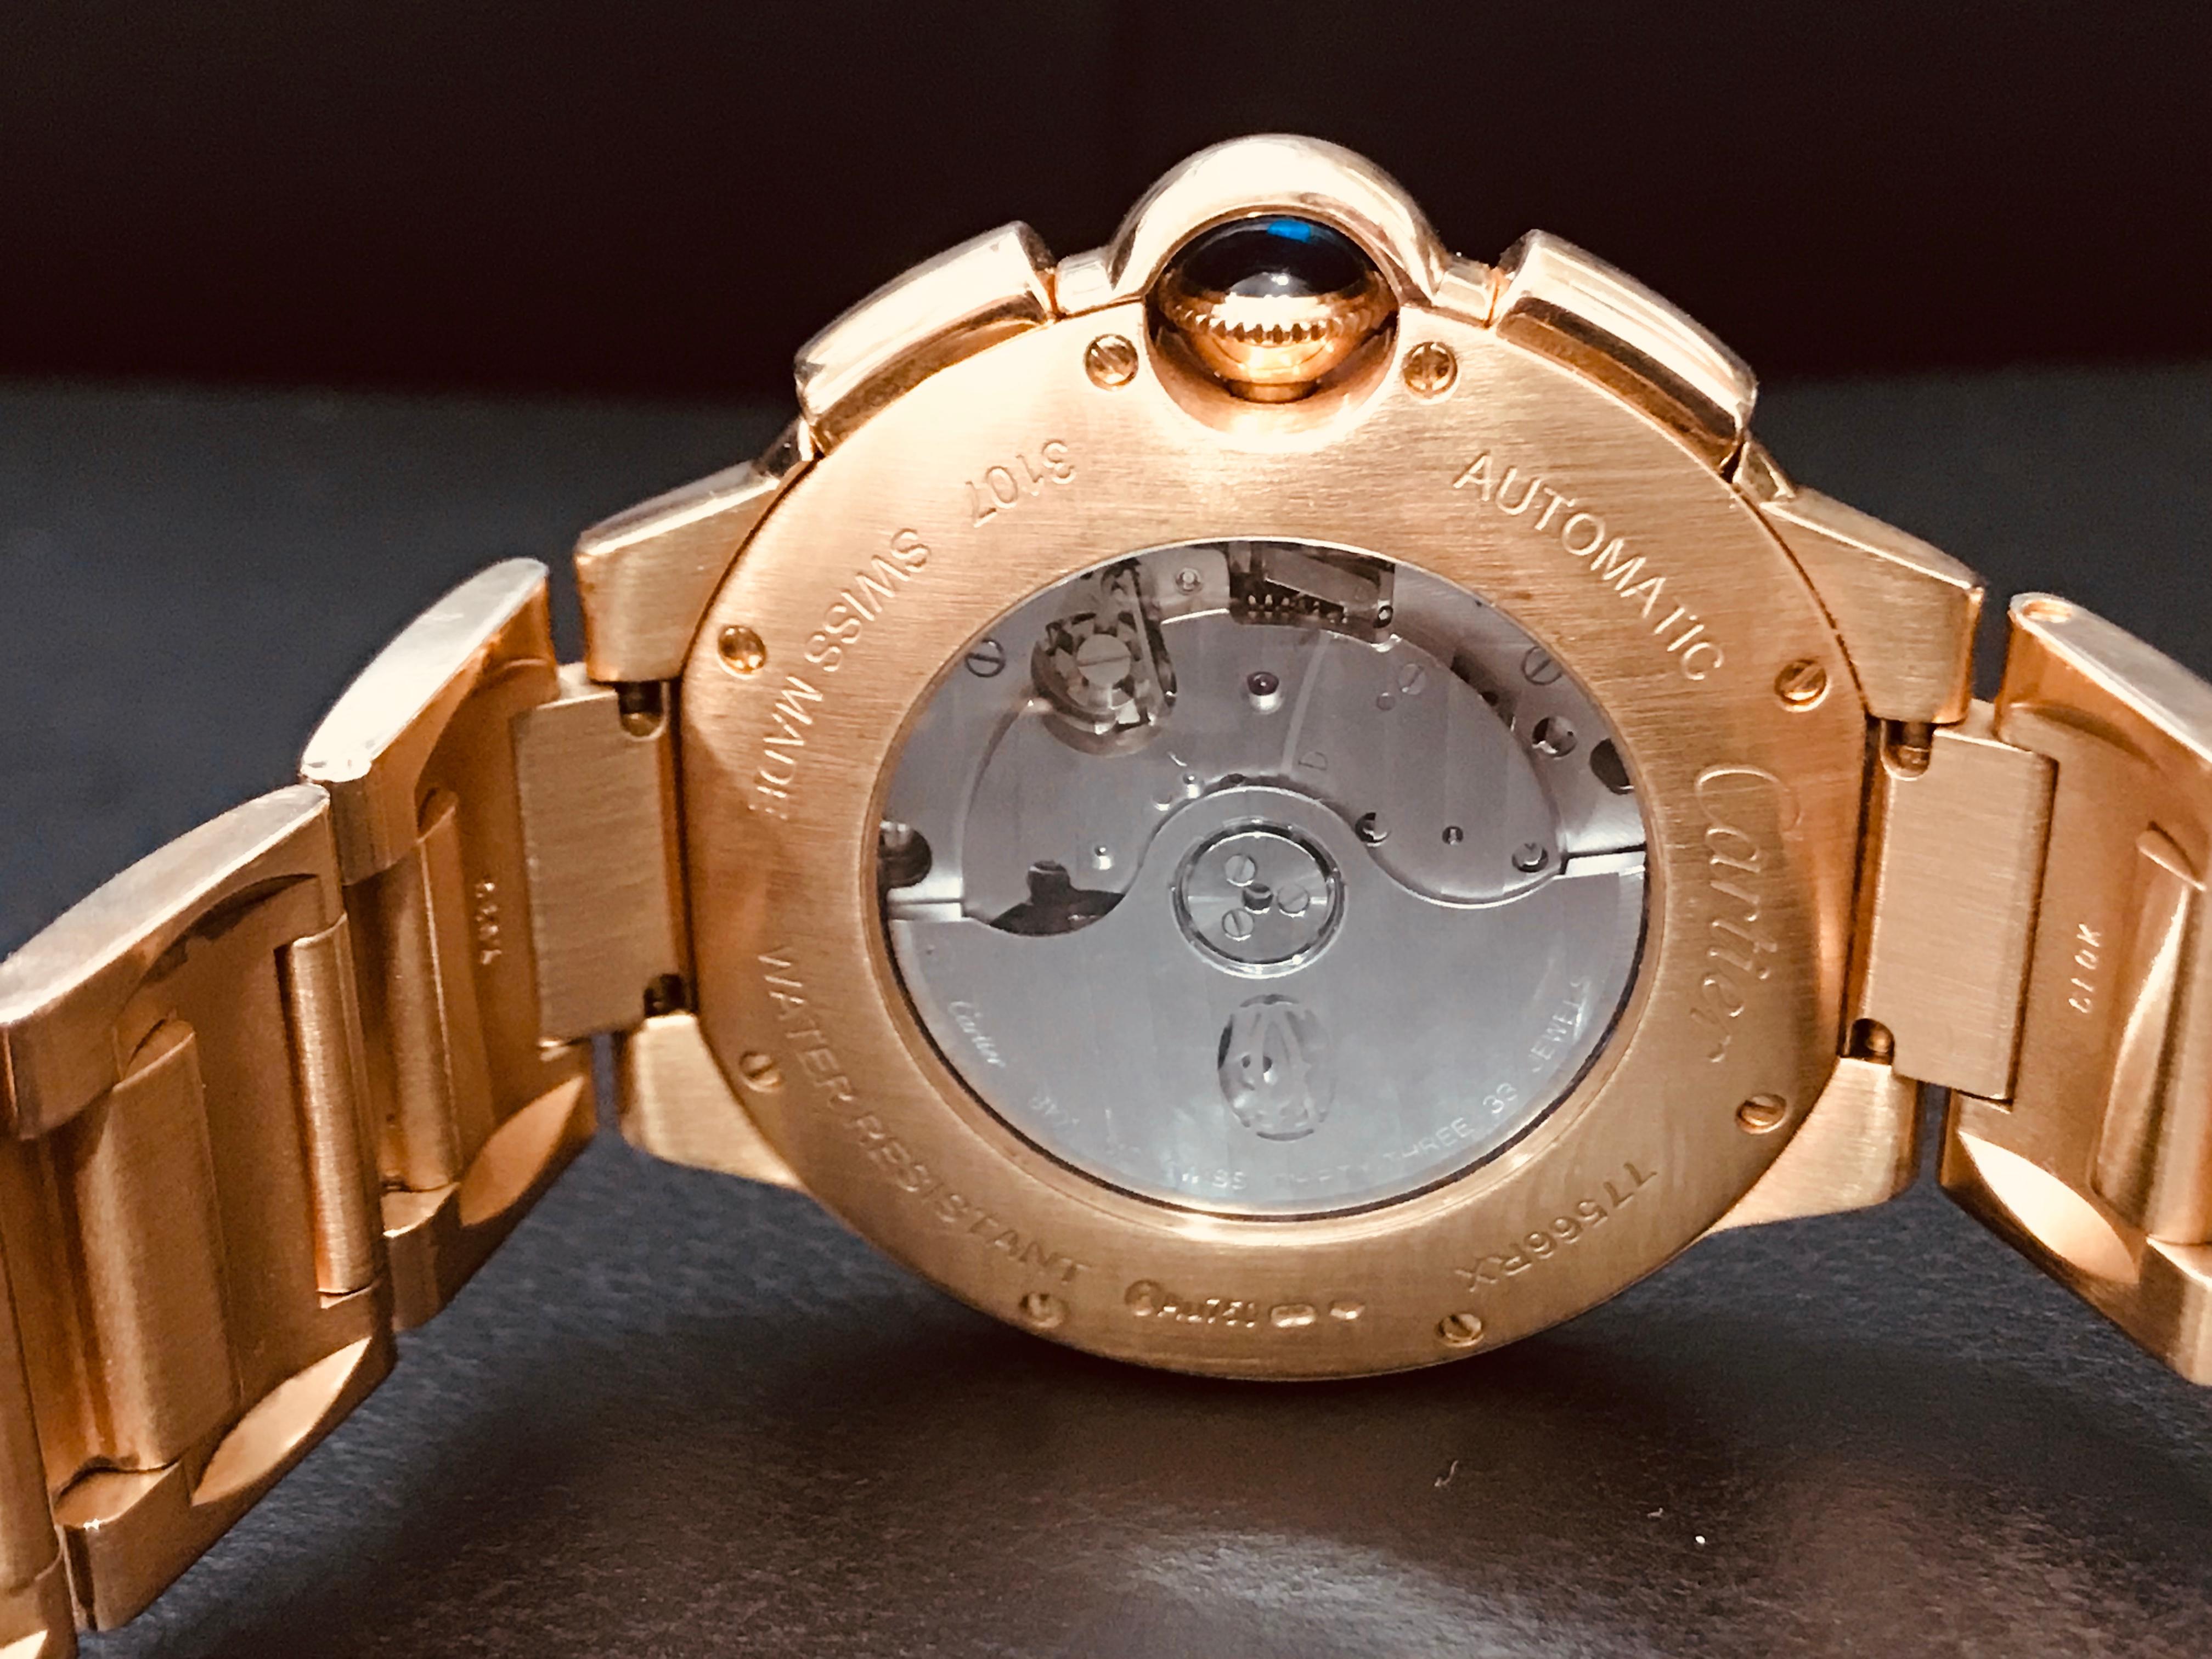 This is A Men's Cartier Ballon Bleu Chronograph 18K Solid Rose Gold WATCH WITH A SUGGESTED RETAIL OF : $43,700.00 !!!
Brand Cartier
Model Ballon Bleu 44mm
Scratch Resistant Glare Proof Sapphire Crystal 
Case material Rose gold
Bracelet material Rose